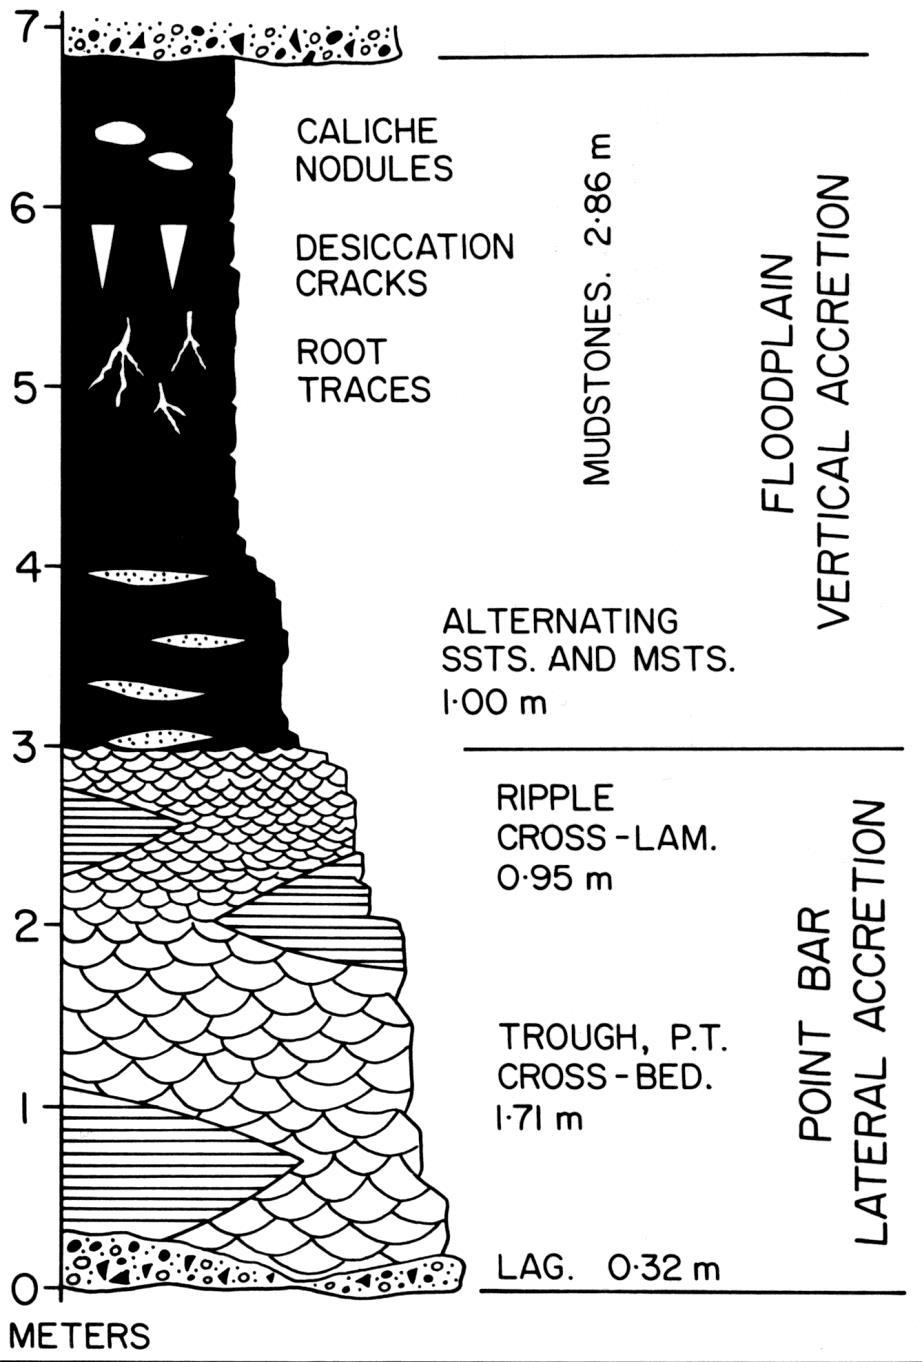 The classic facies model for meandering river distal floodplain mud with roots, desiccation cracks, etc.